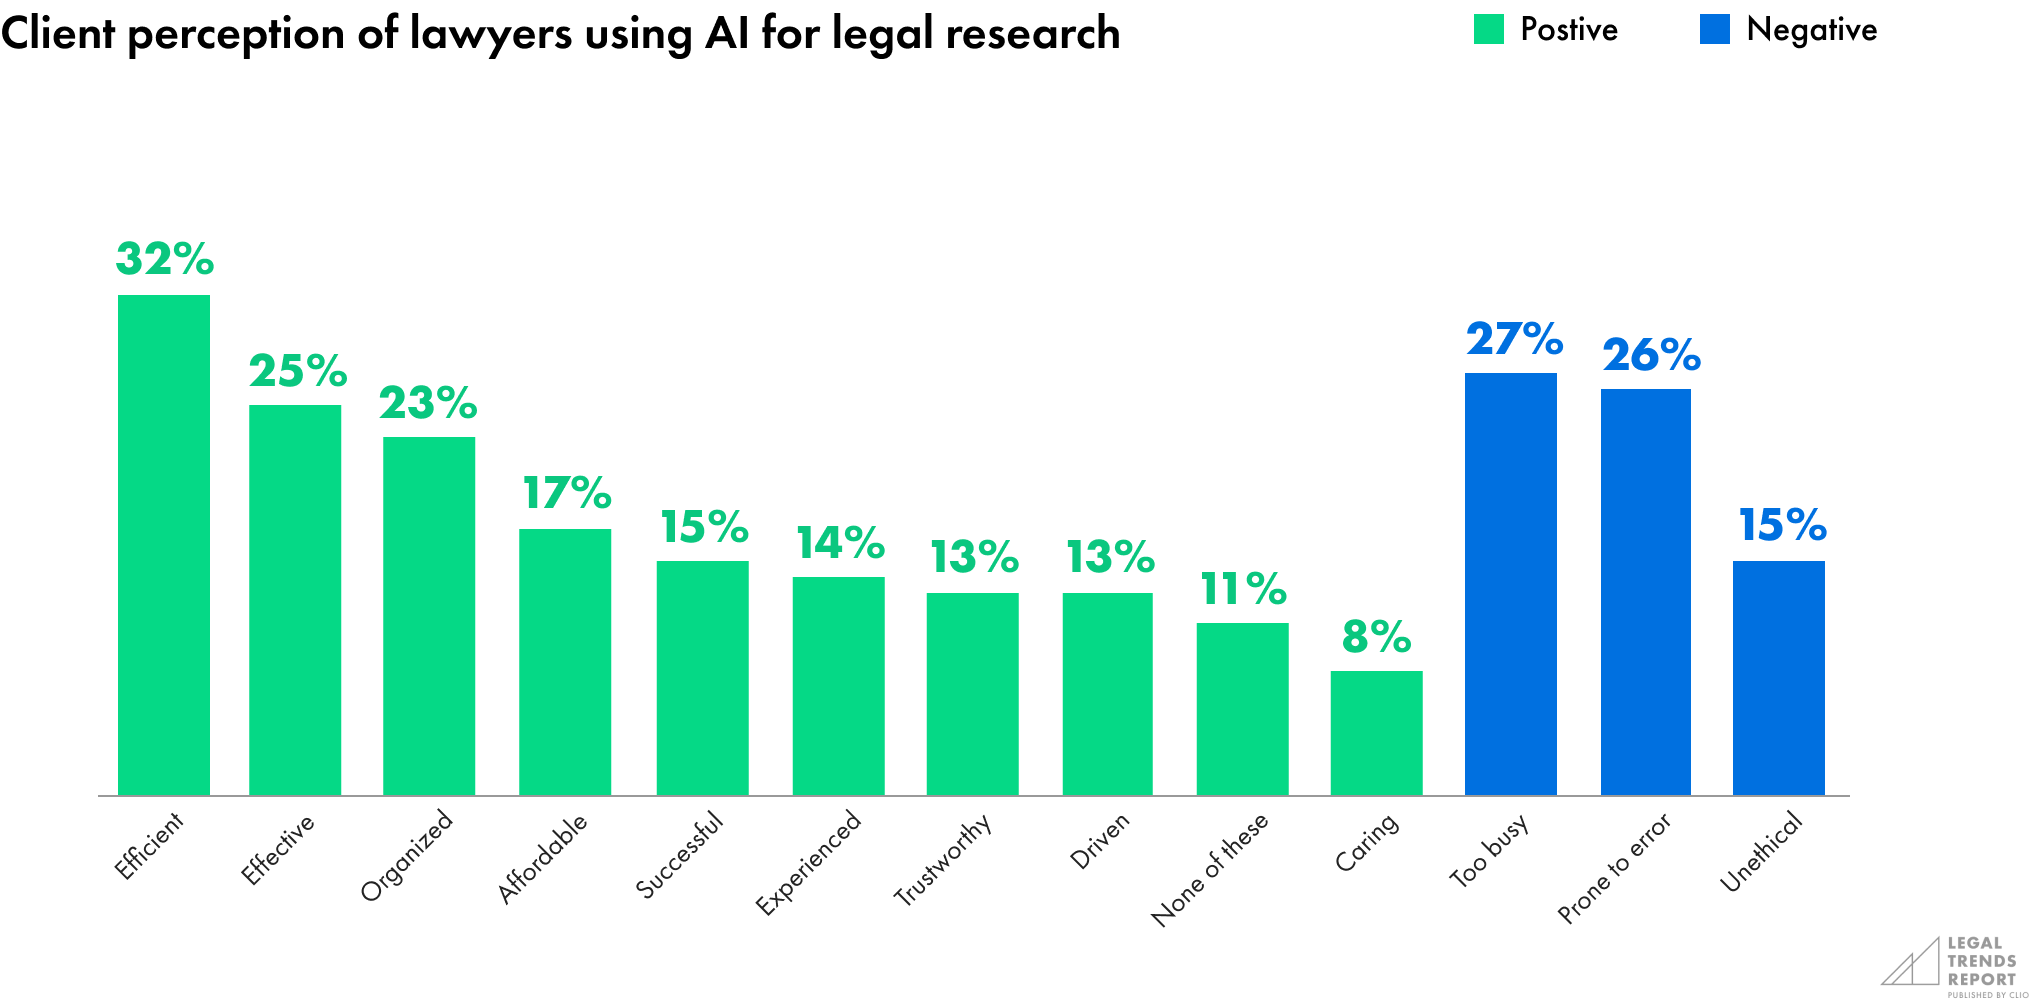 Client perception of lawyers using AI for legal research